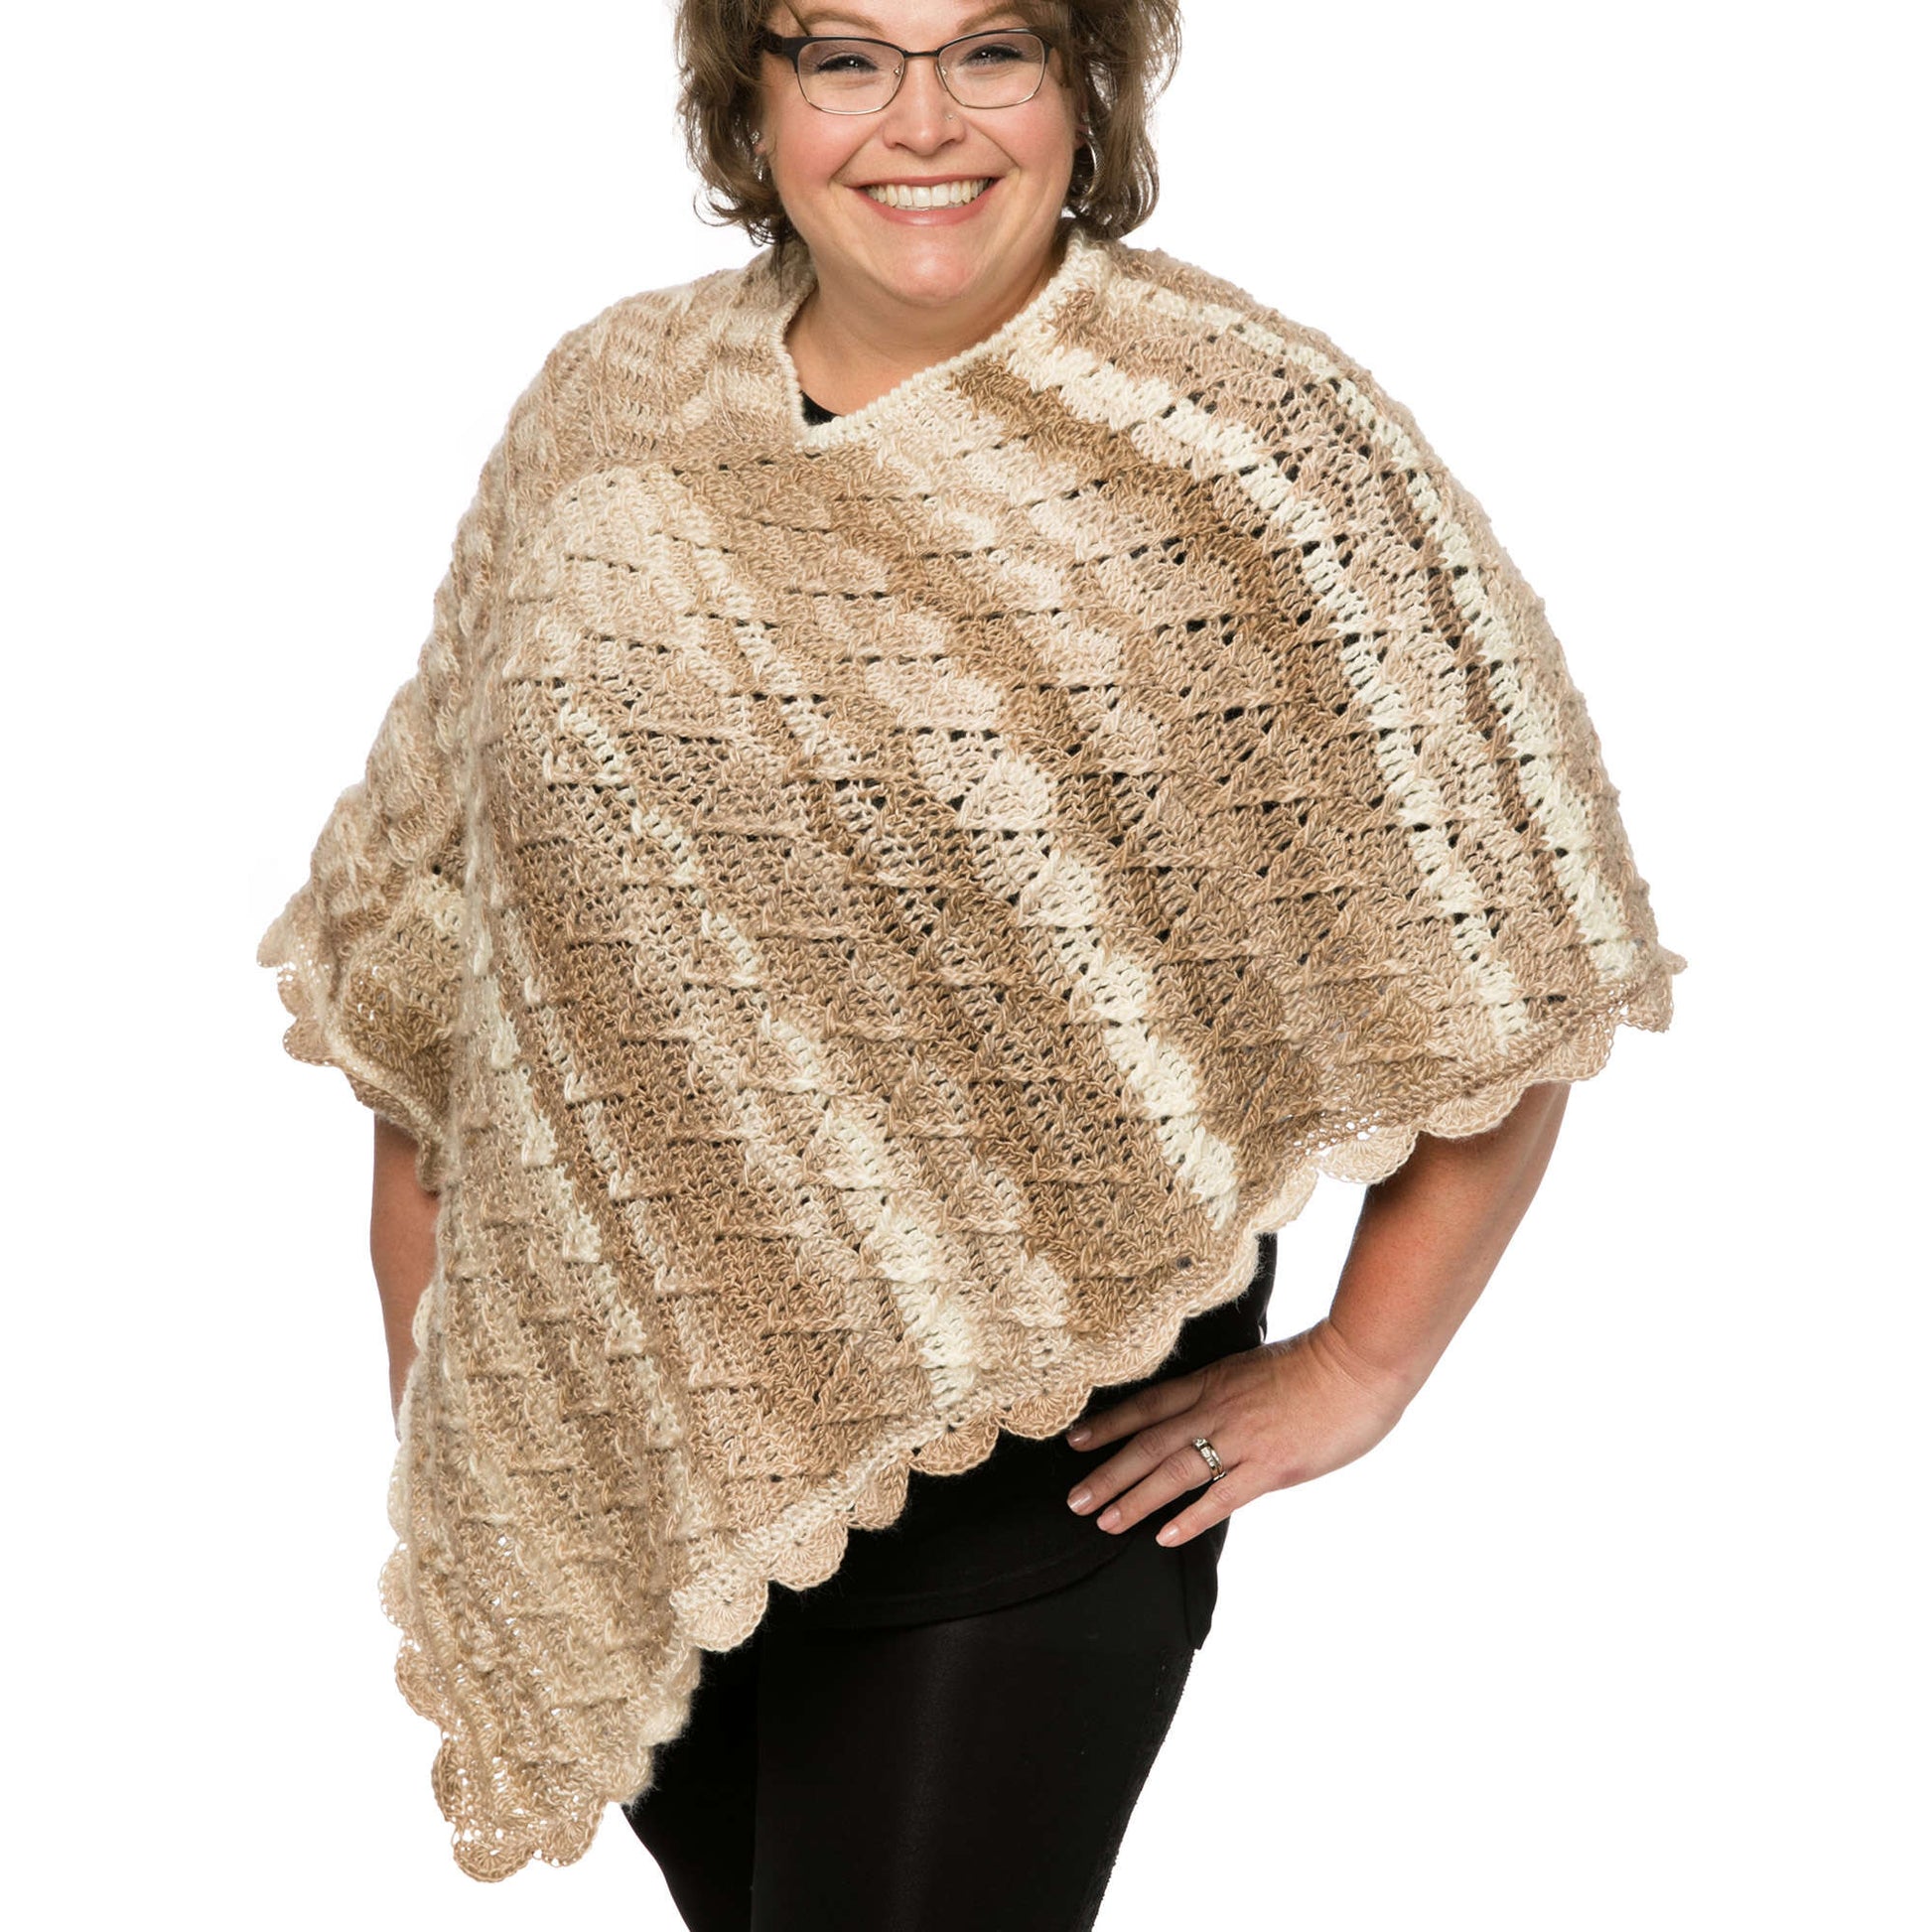 Red Heart Marly's Perfect Crew Neck Poncho Red Heart Marly's Perfect Crew Neck Poncho